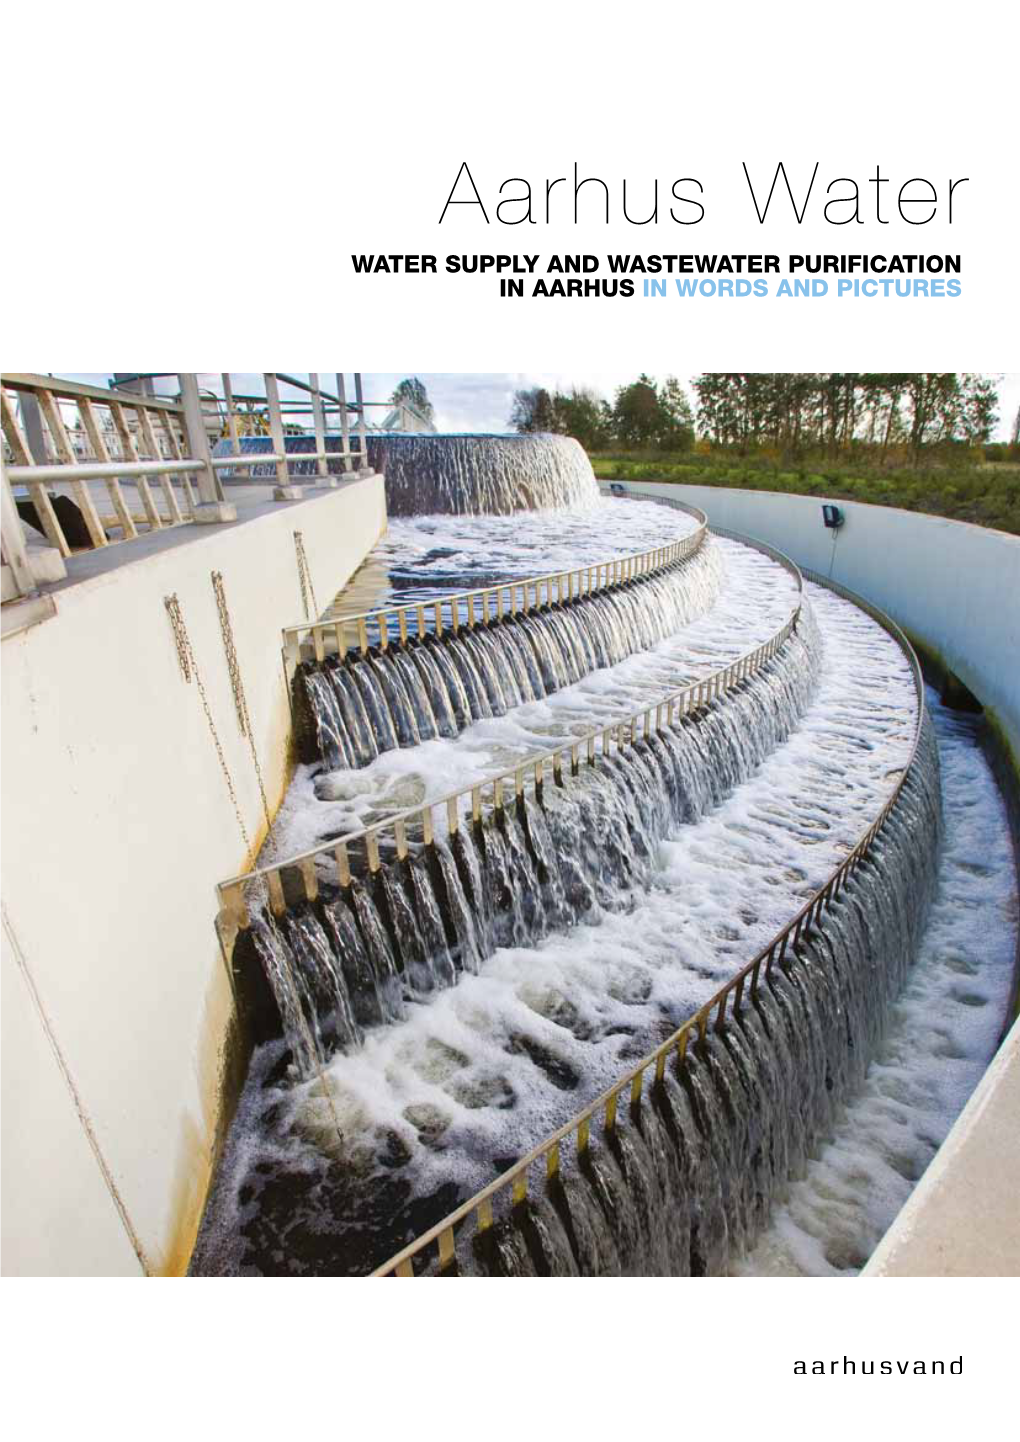 Aarhus Water Water Supply and Wastewater Purification in Aarhus in Words and Pictures 2/3 a a R H U S W a T E R · a a R H U S W a T E R